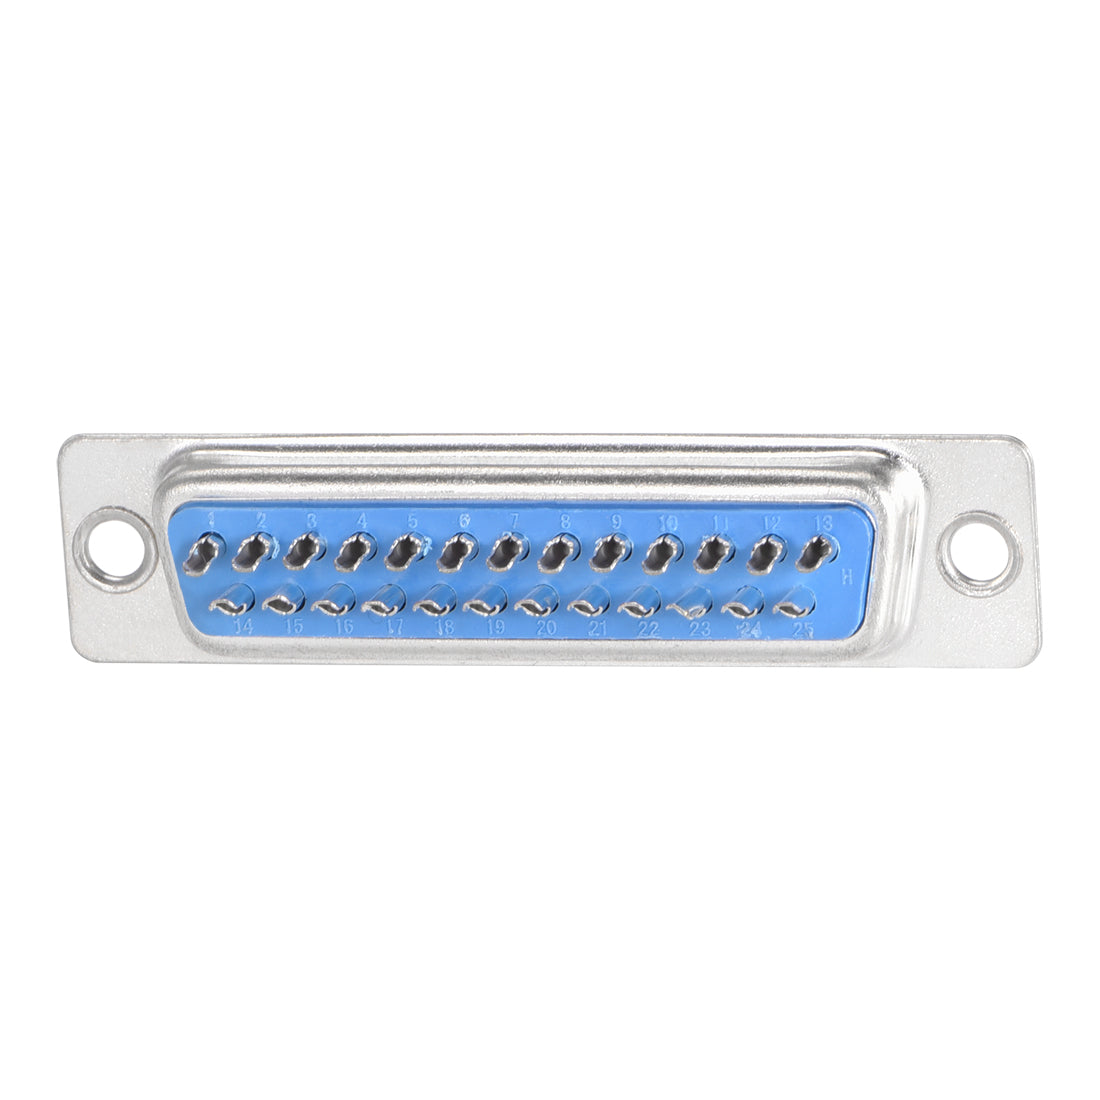 uxcell Uxcell D-sub Connector DB25 Female Socket 25-pin 2-row Port Terminal Breakout for Mechanical Equipment CNC Computers Blue 1pc